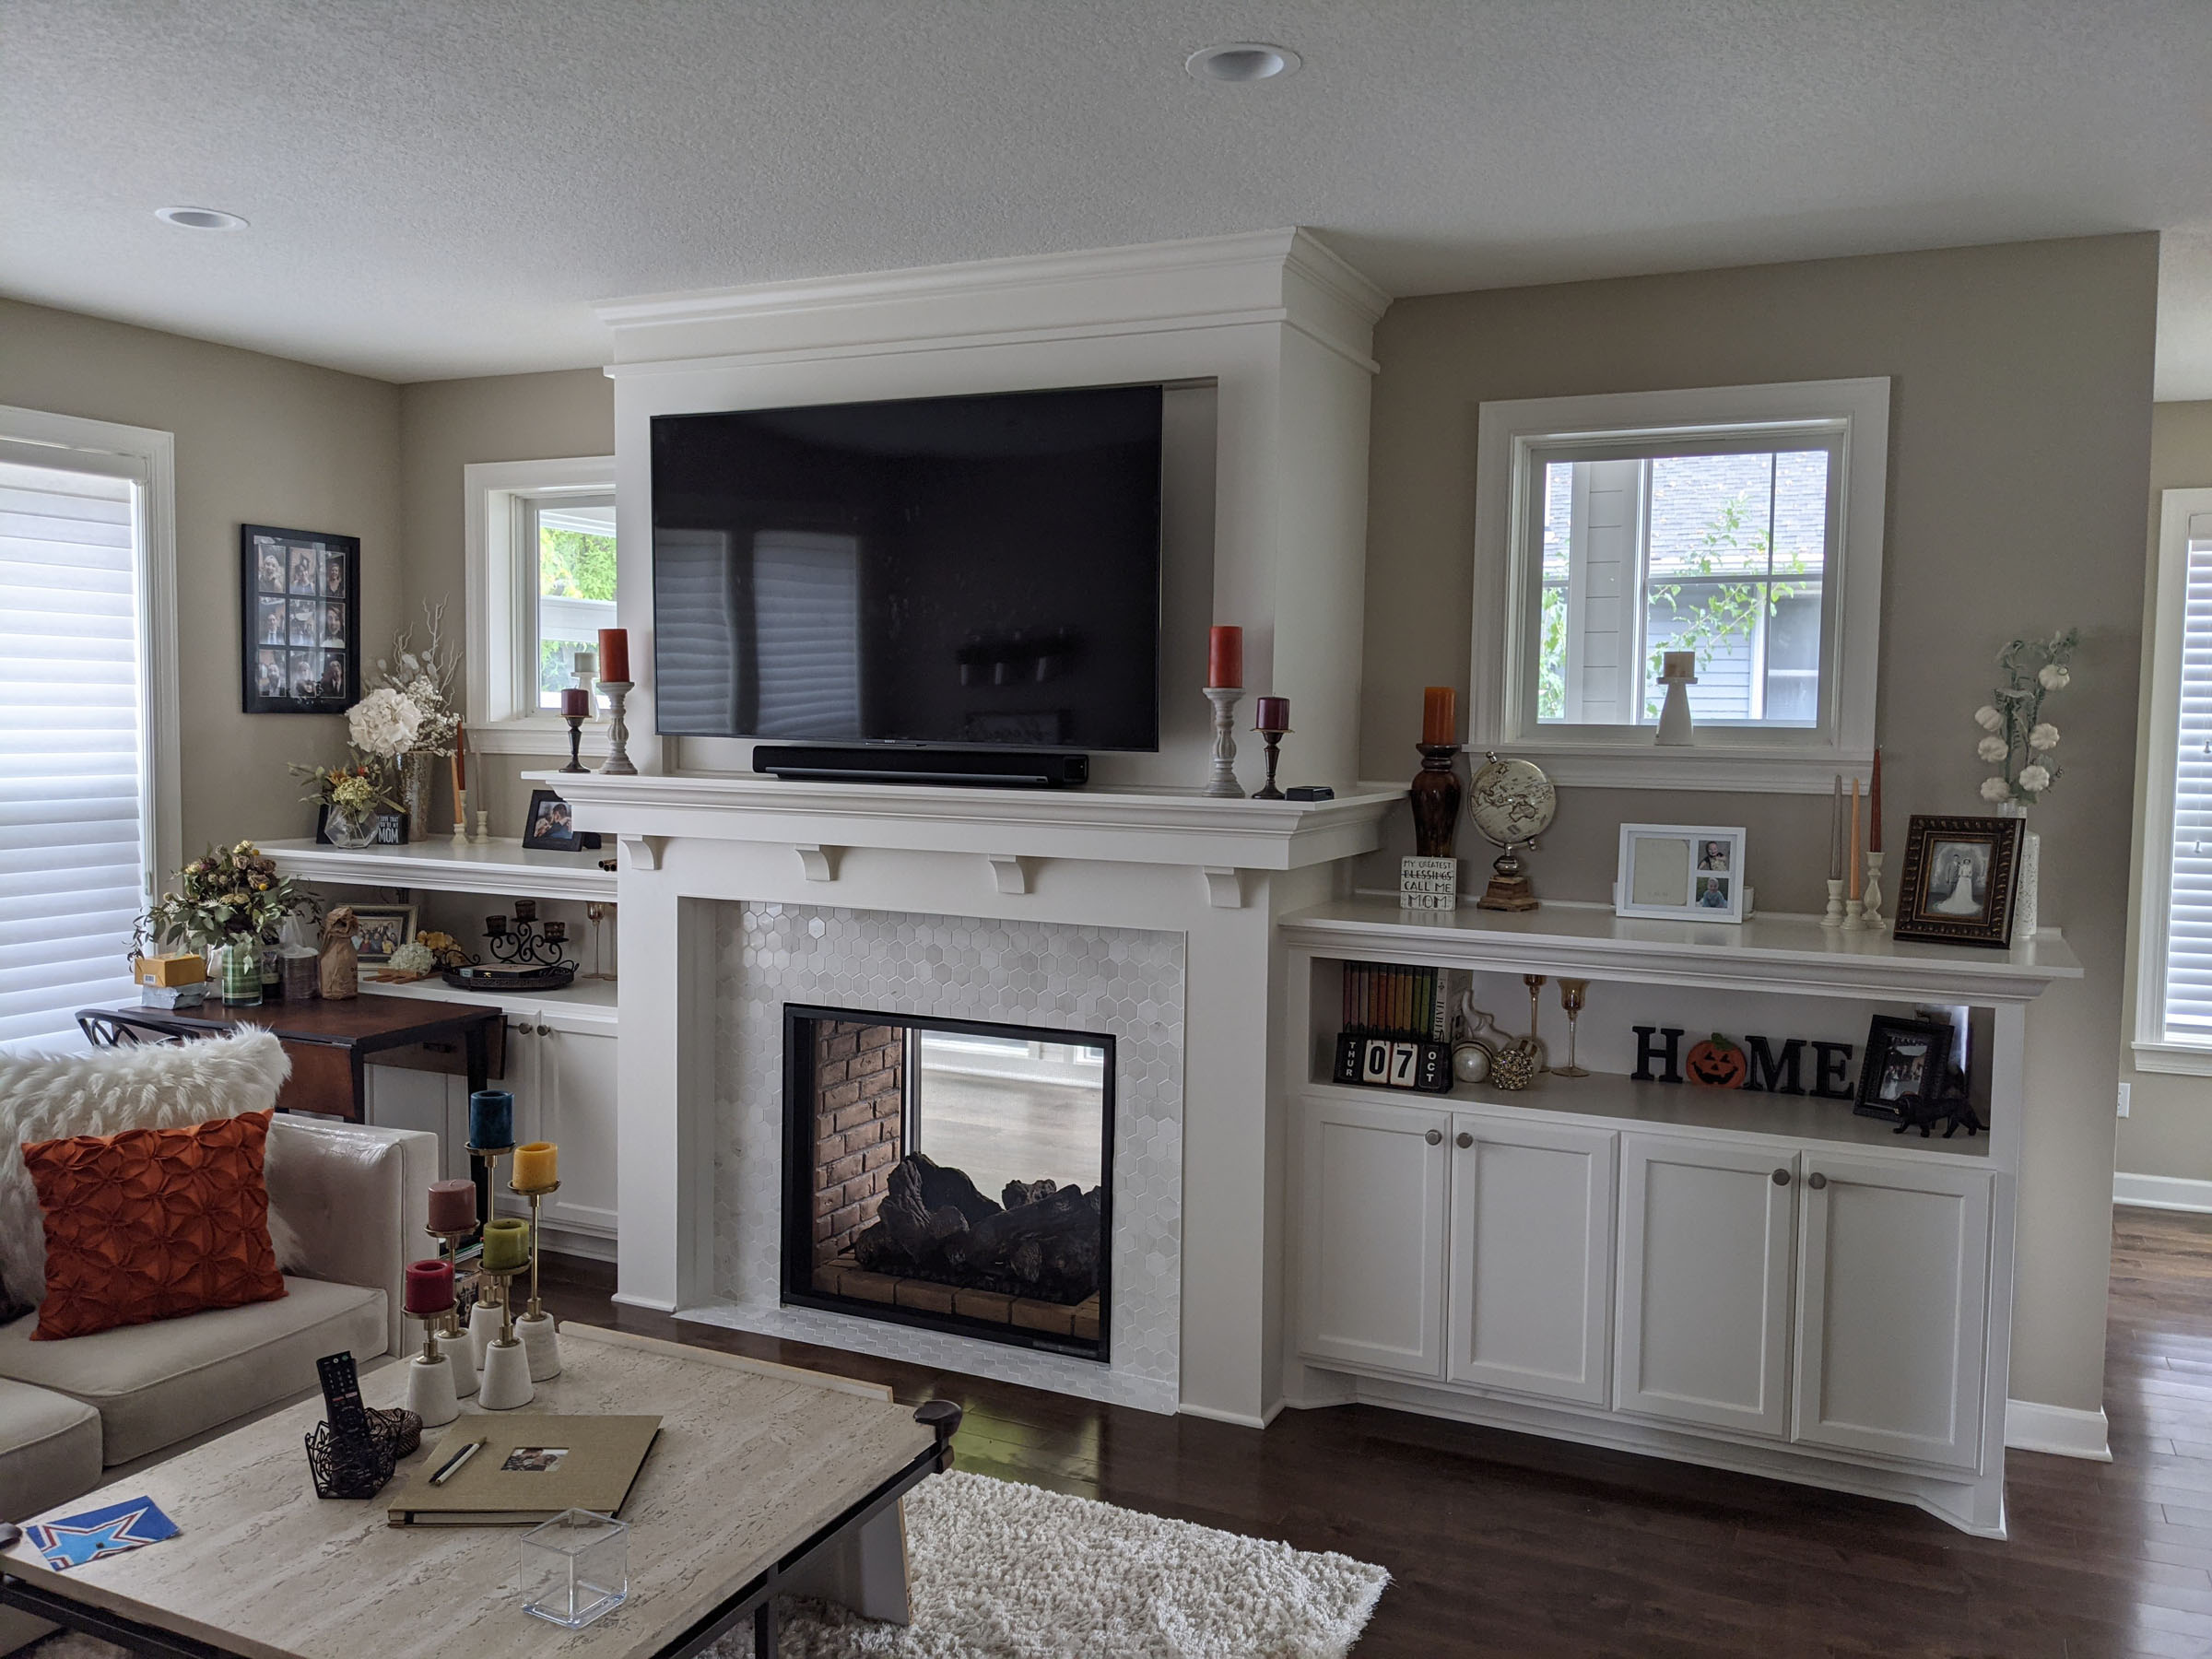 Existing Cabinets @ interior, worked new fireplace & new tile to fit in seamlessly!